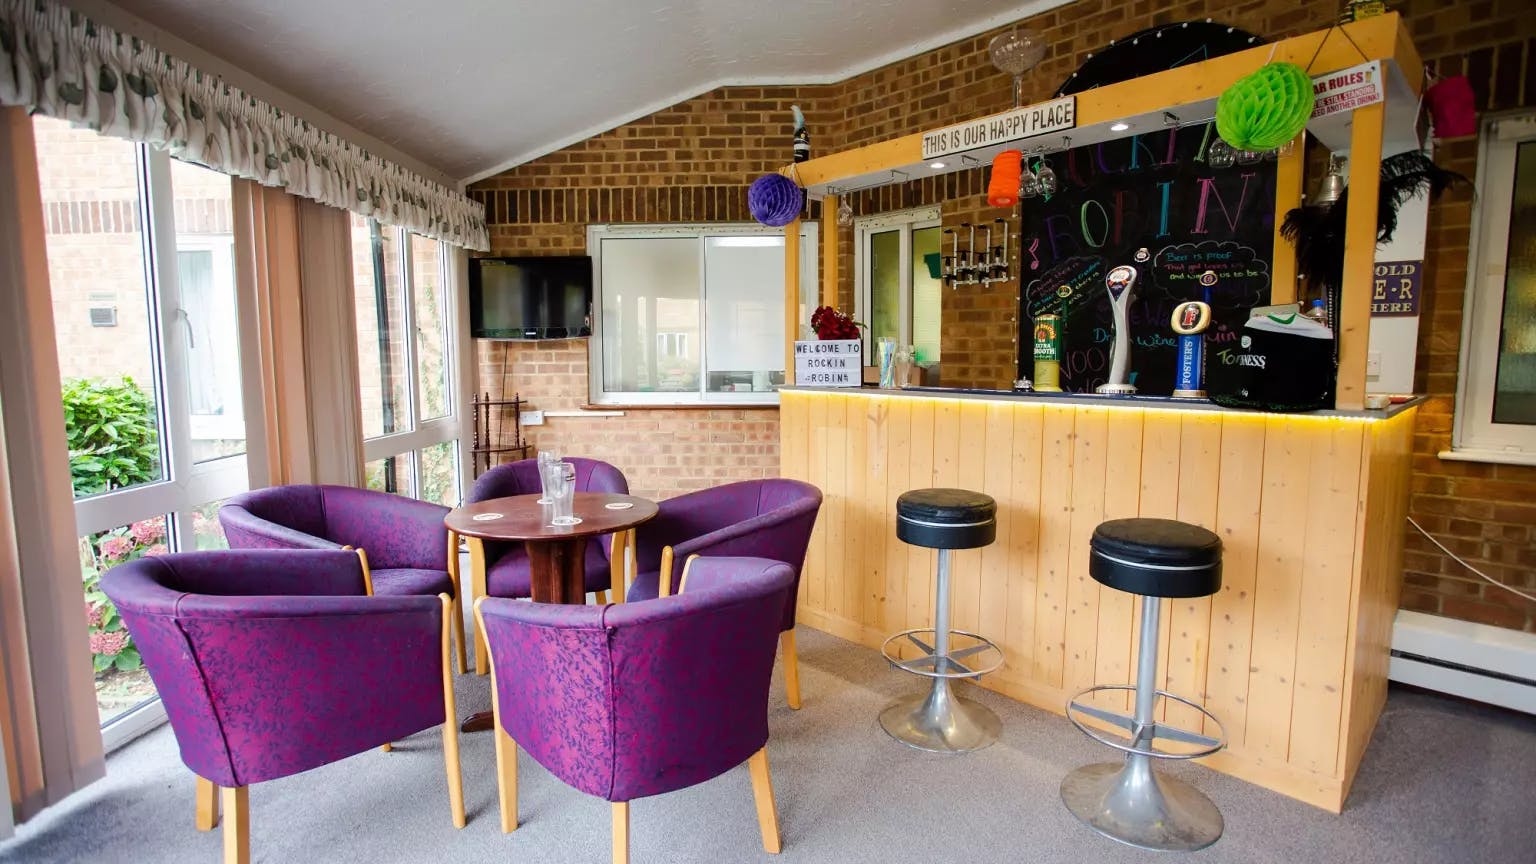 Lounge of Courtland Lodge care home in Watford, Hertfordshire